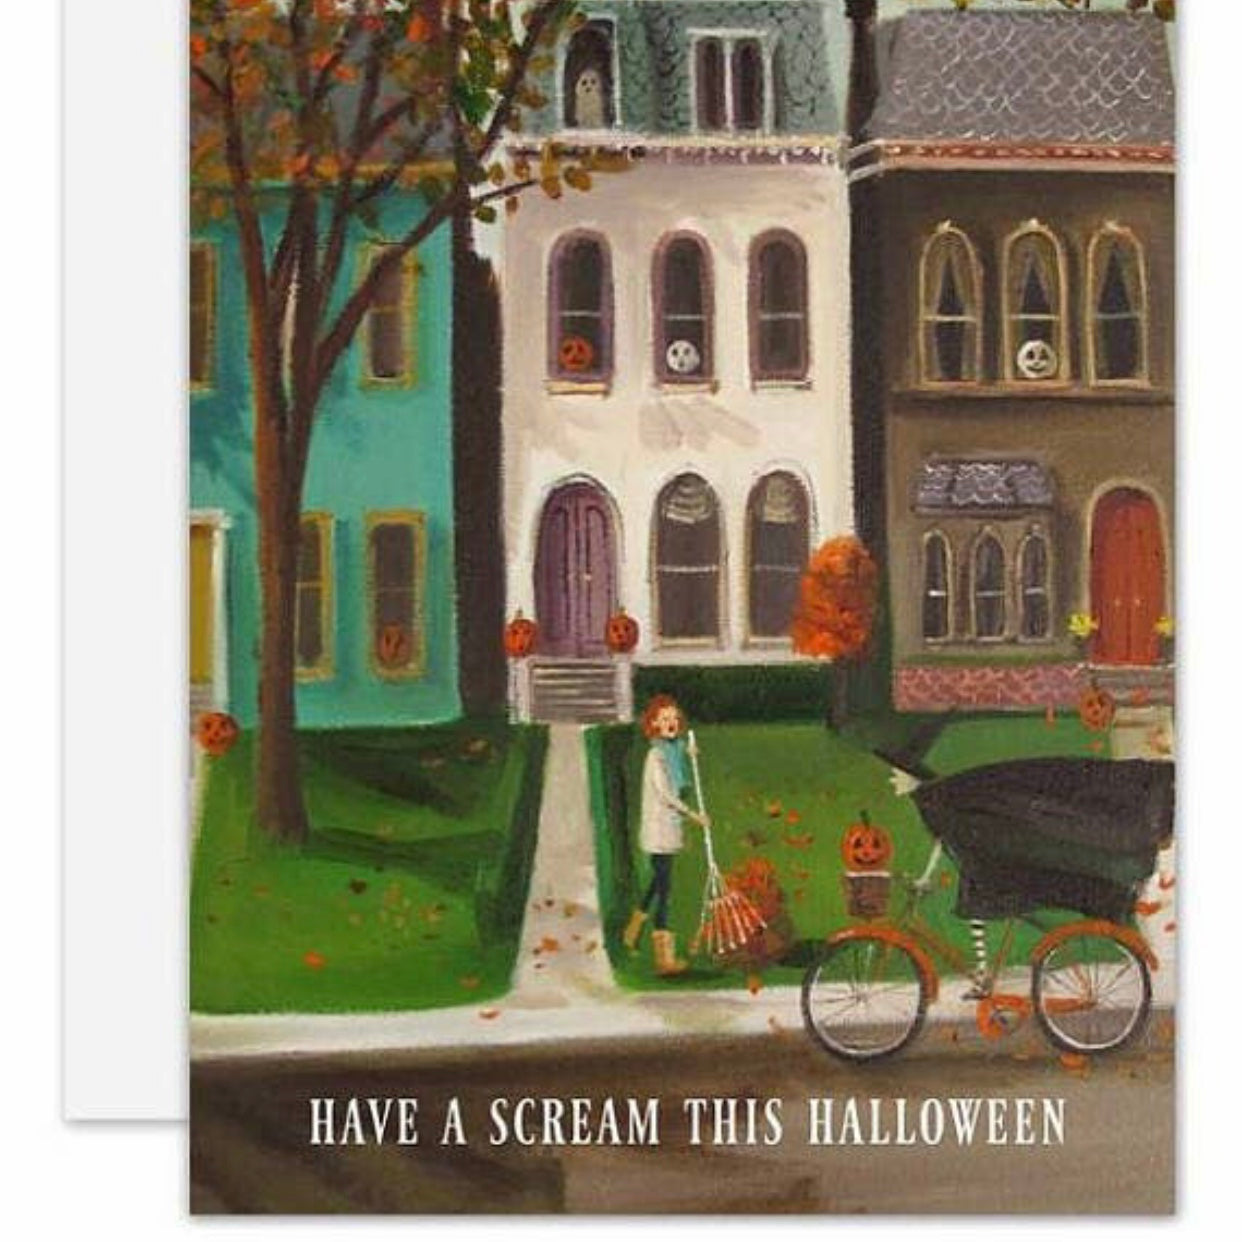 Have a Scream Halloween greeting card